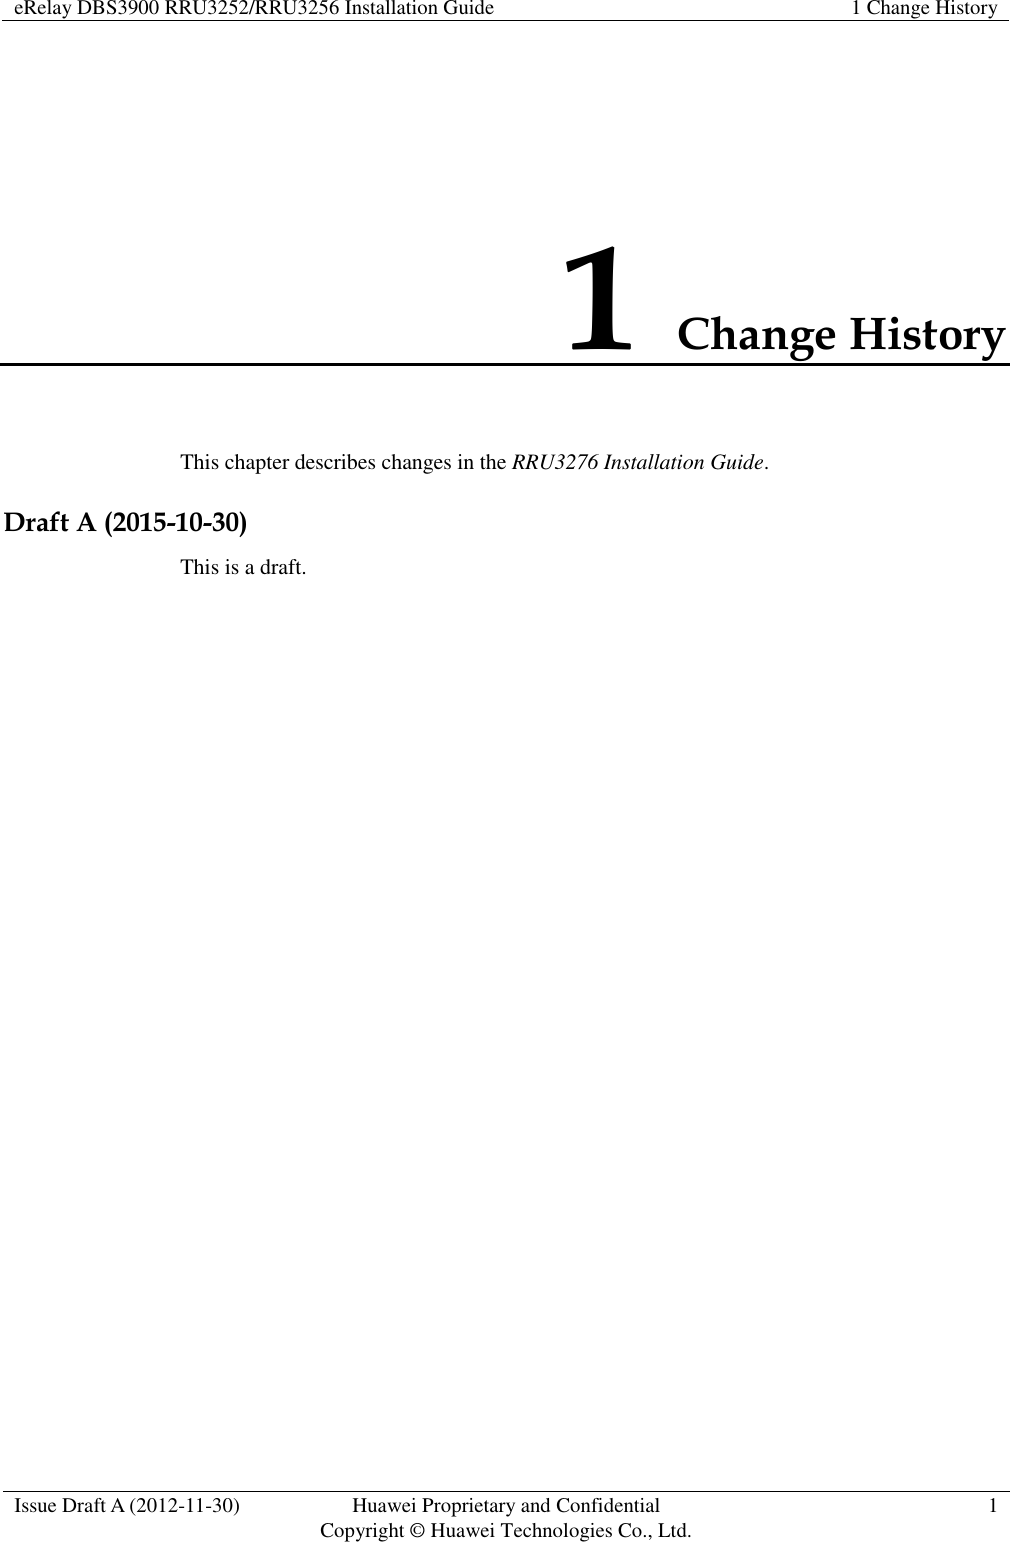 eRelay DBS3900 RRU3252/RRU3256 Installation Guide 1 Change History  Issue Draft A (2012-11-30) Huawei Proprietary and Confidential                                     Copyright © Huawei Technologies Co., Ltd. 1  1 Change History This chapter describes changes in the RRU3276 Installation Guide. Draft A (2015-10-30) This is a draft. 